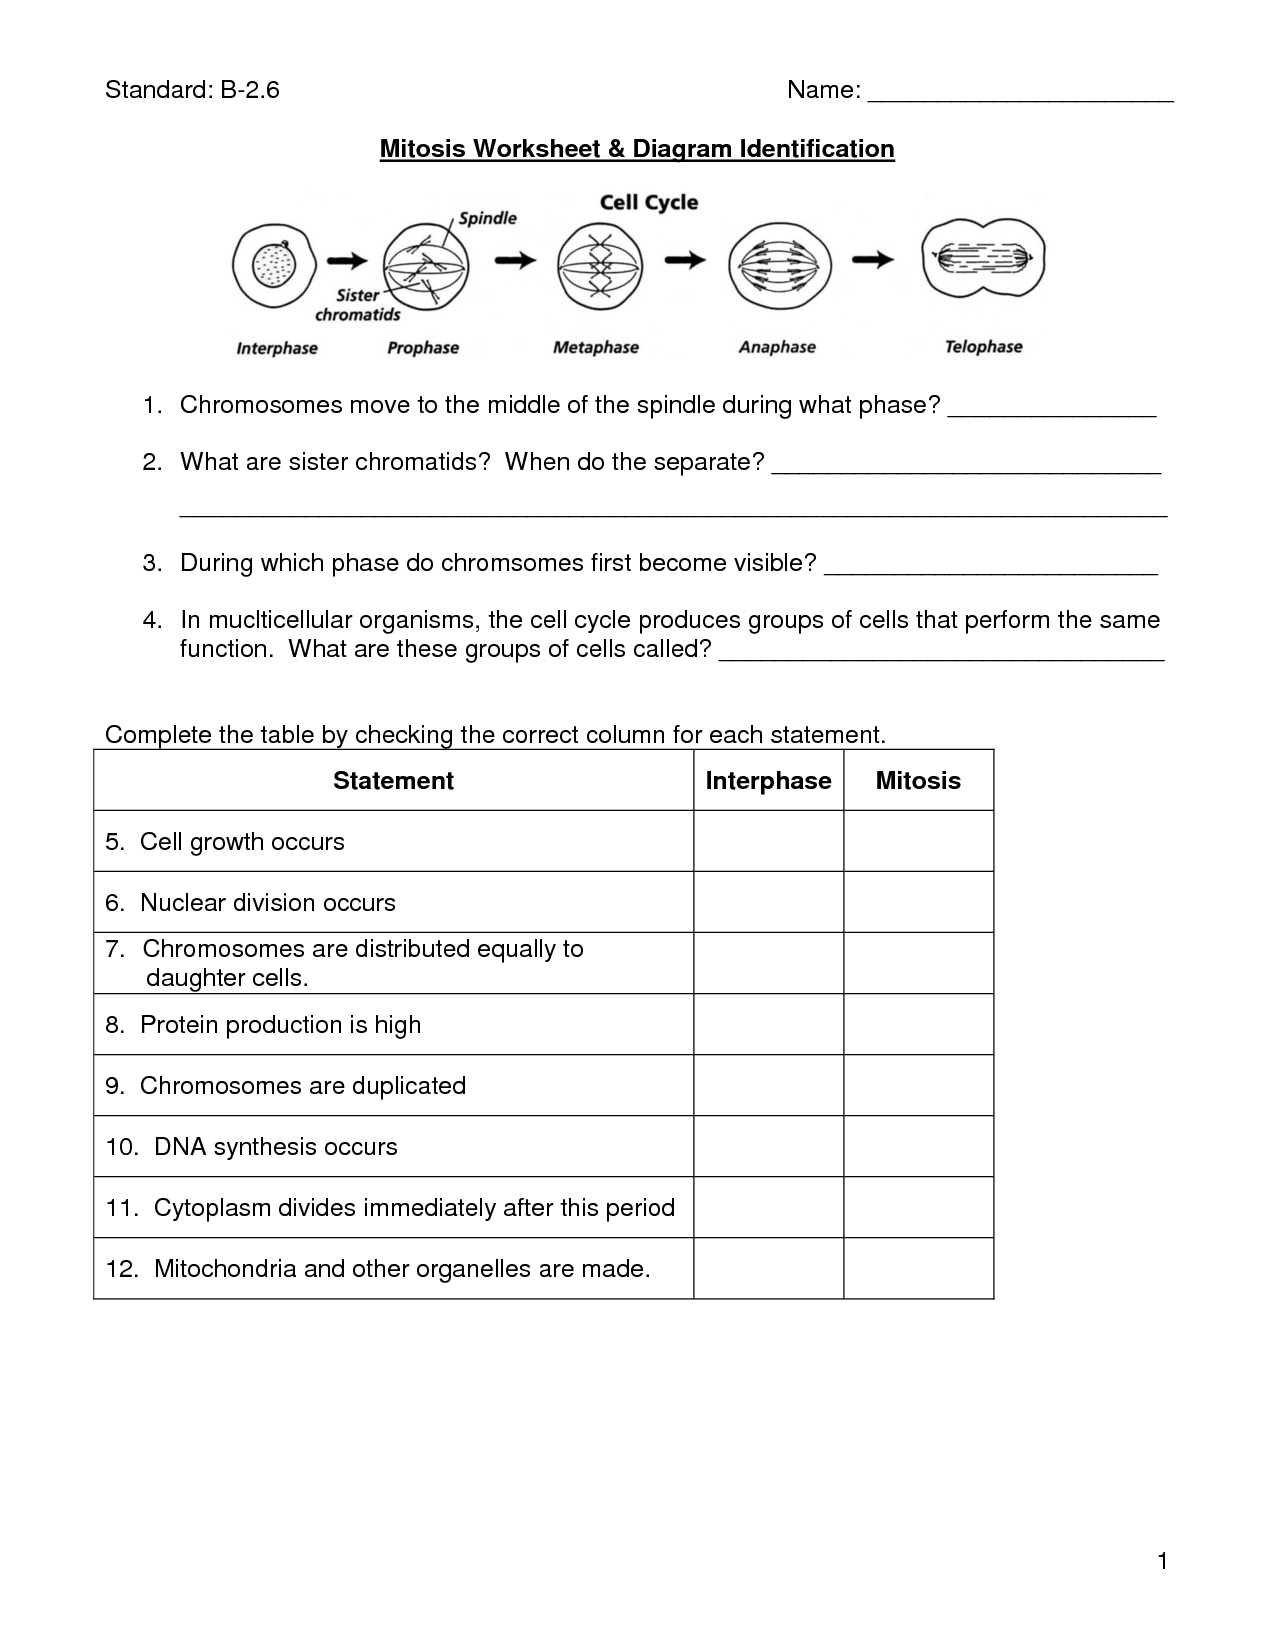 Mitosis Worksheet | Cells, Photosynthesis, Mitosis | Biology Lessons - Free Printable Biology Worksheets For High School